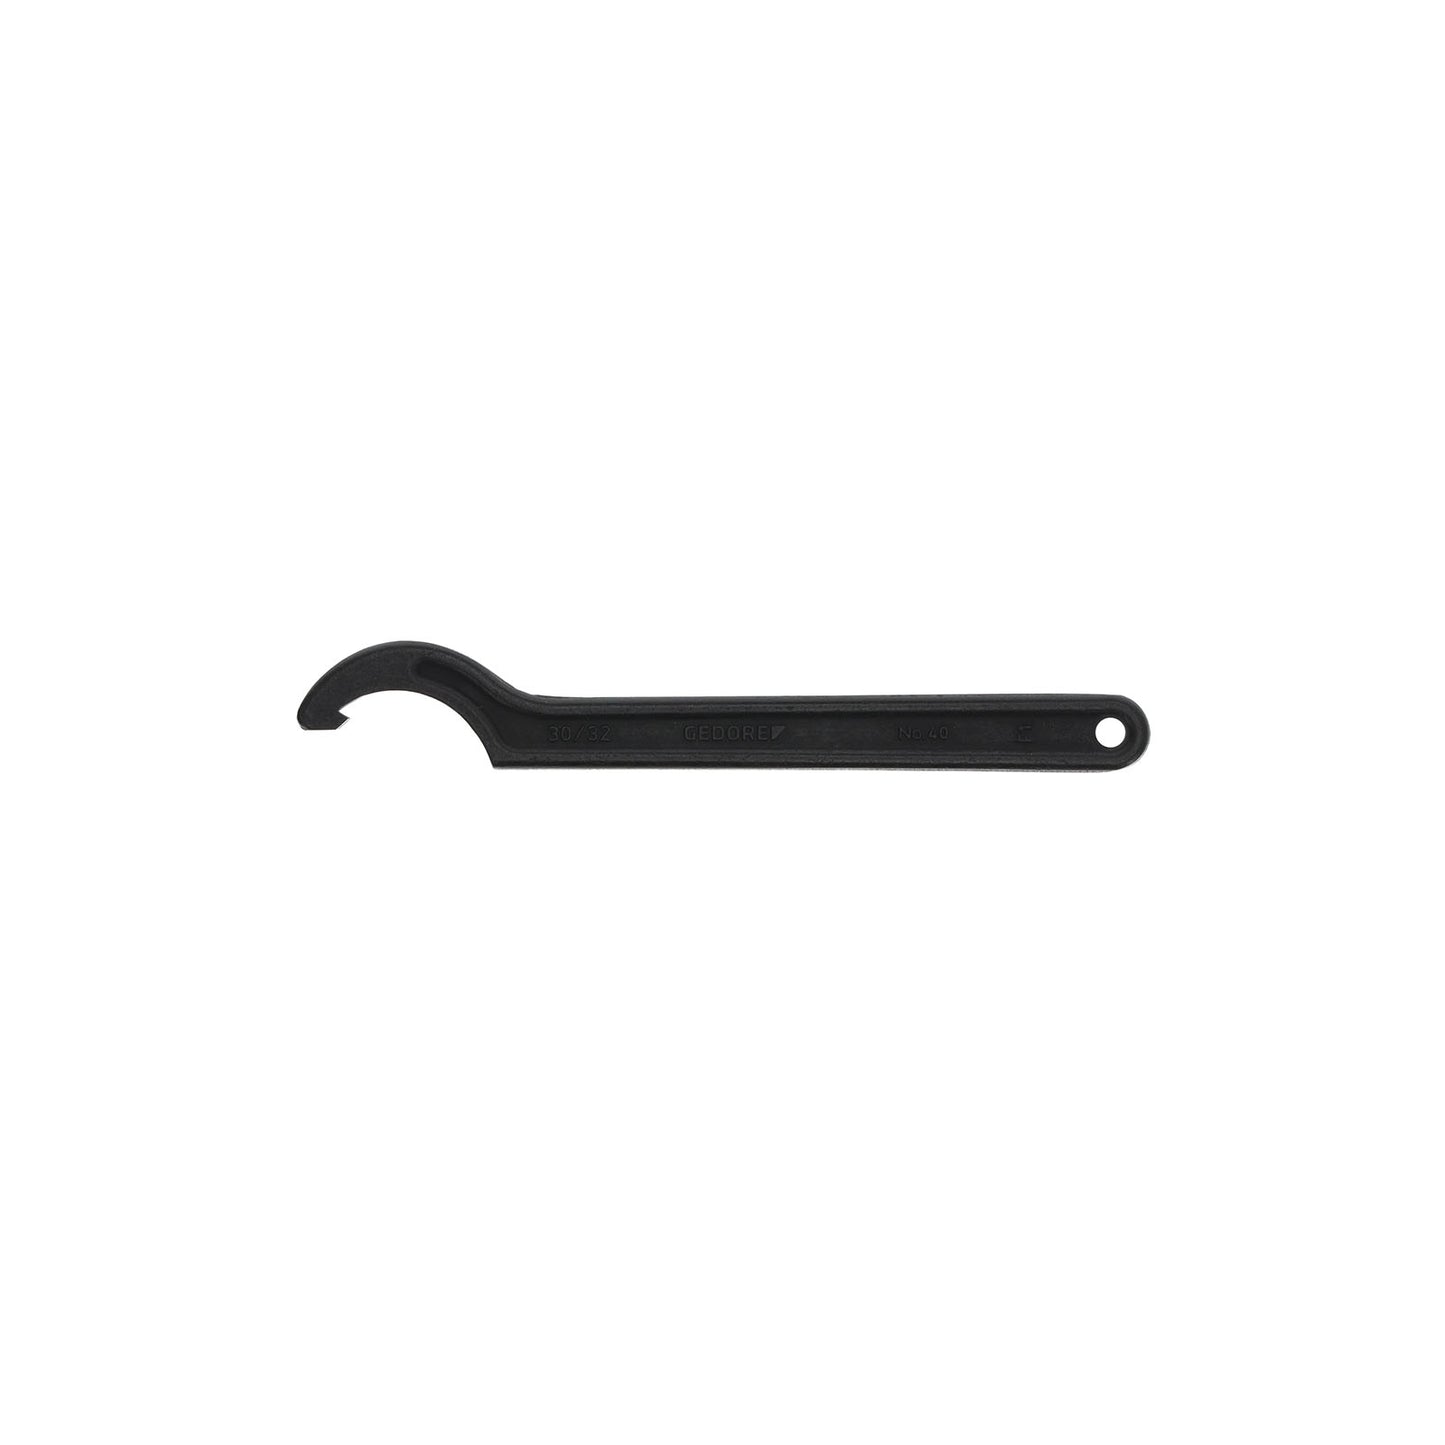 GEDORE 40 30-32 - Hook Wrench, 30-32 (6334100)